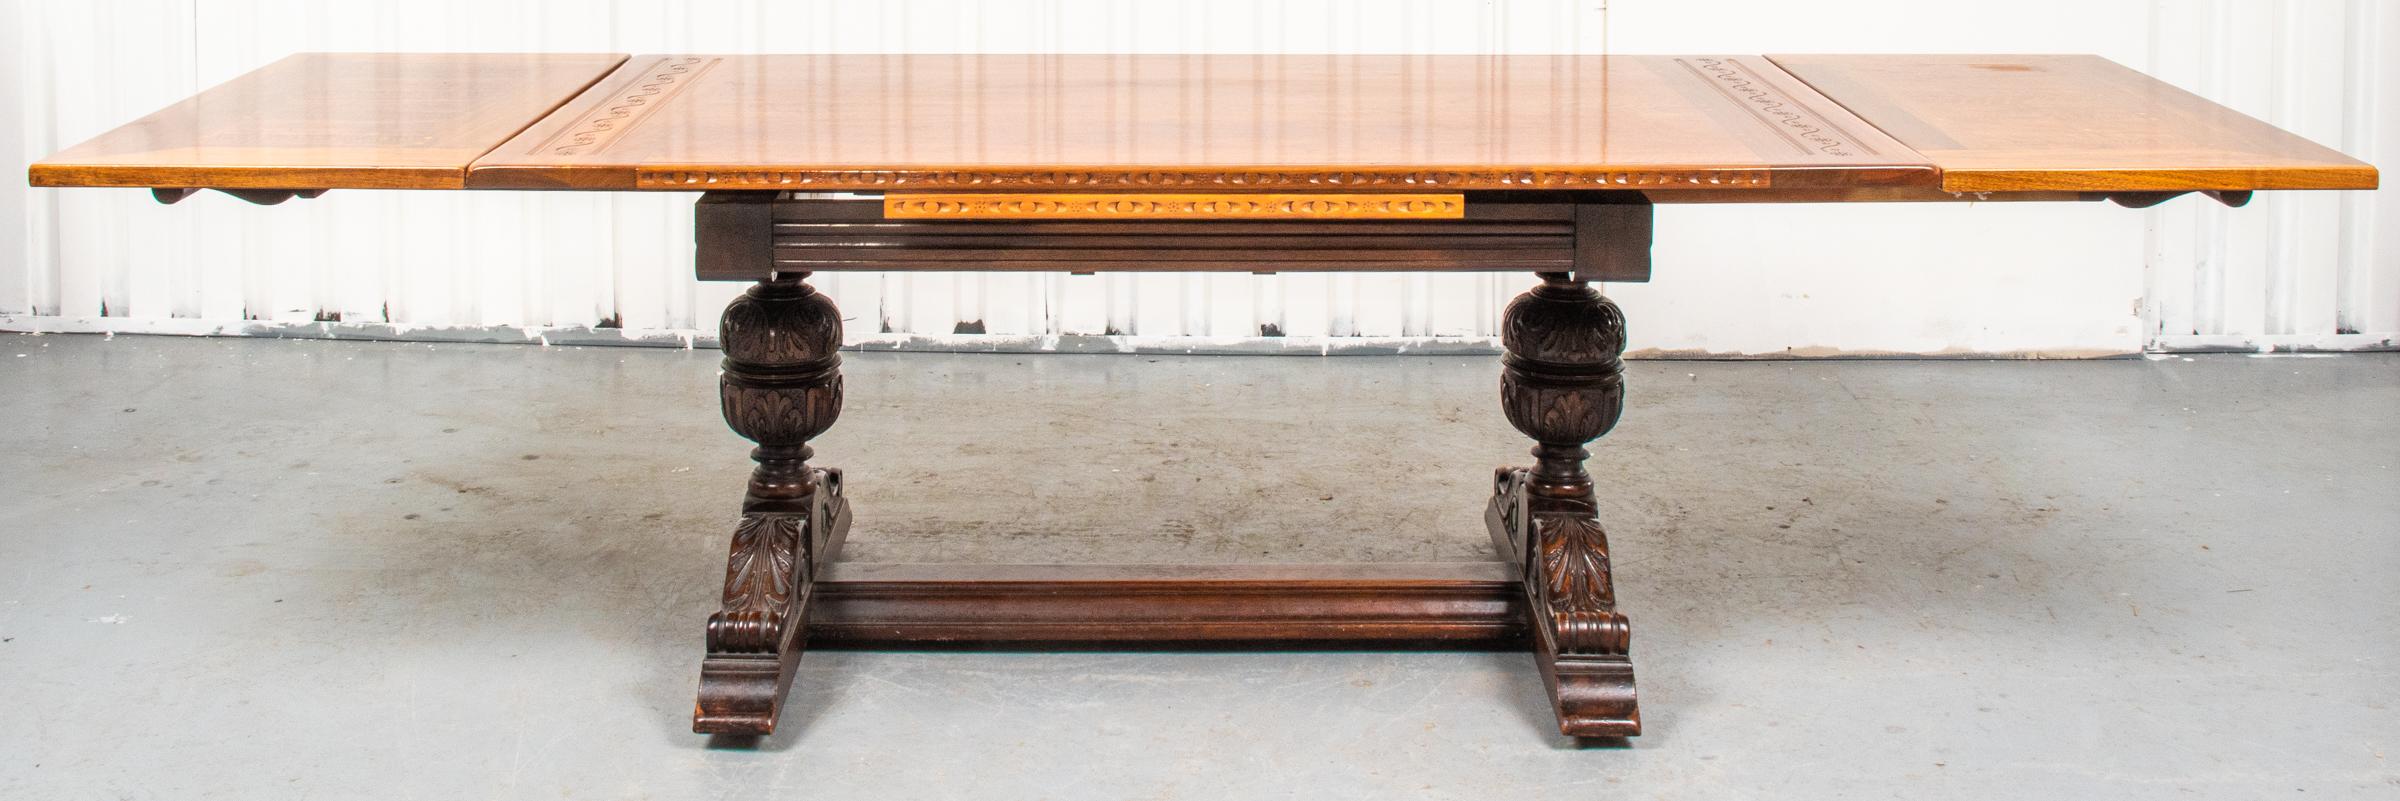 Extension mixed wood dining / trestle table, carved and inlaid in the English Baroque taste, the removable top rests on the two side retractable leaves, raised on bulbous cup and cover legs over acanthus carved feet. 30.5